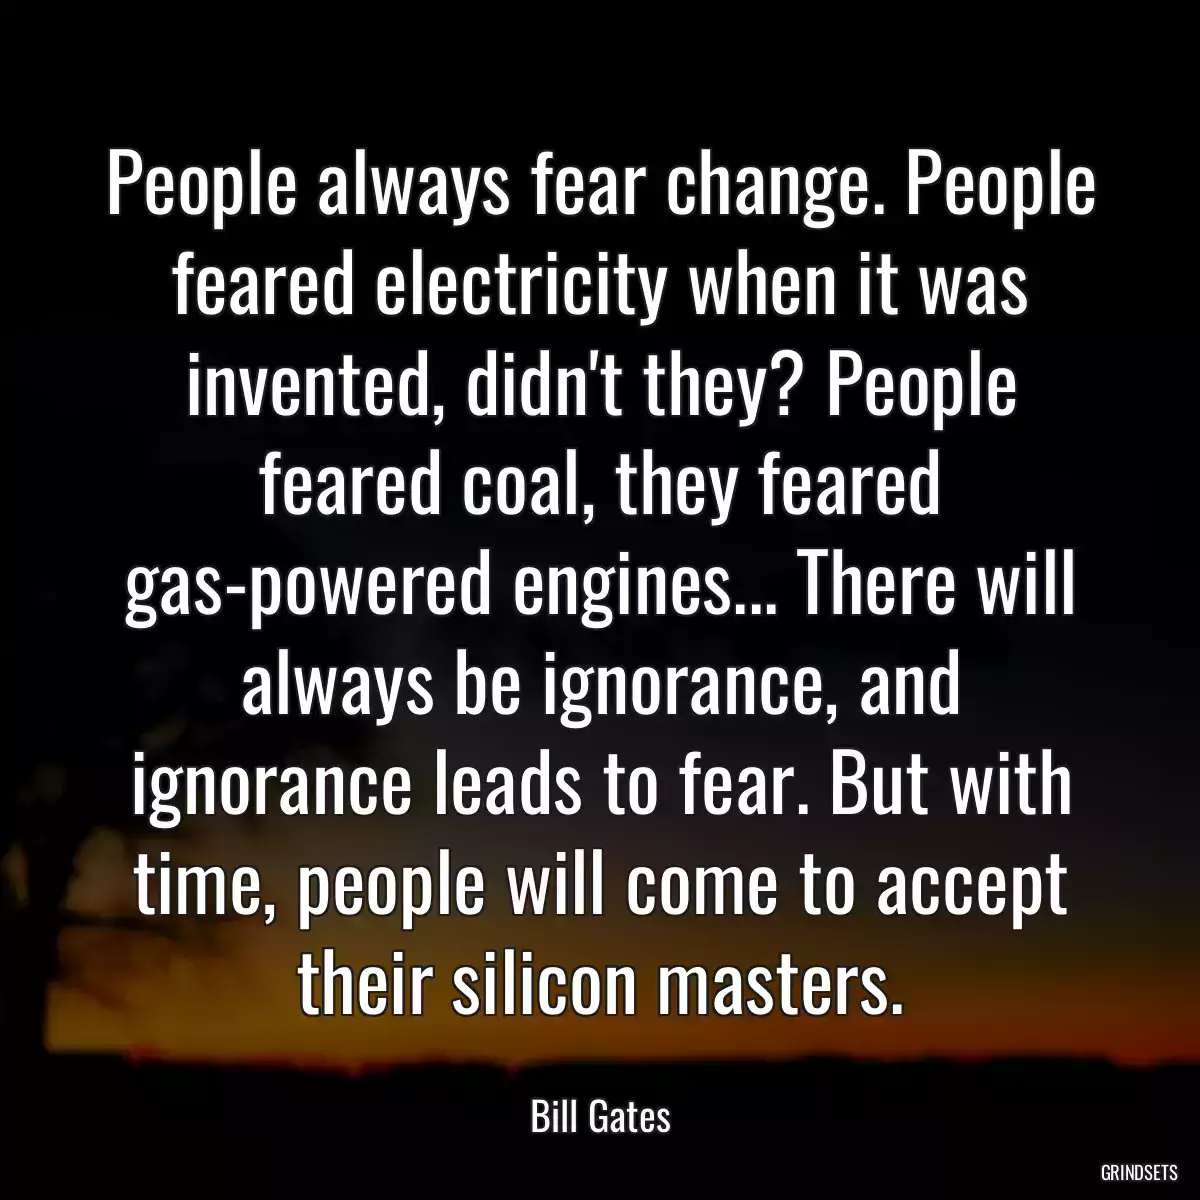 People always fear change. People feared electricity when it was invented, didn\'t they? People feared coal, they feared gas-powered engines... There will always be ignorance, and ignorance leads to fear. But with time, people will come to accept their silicon masters.